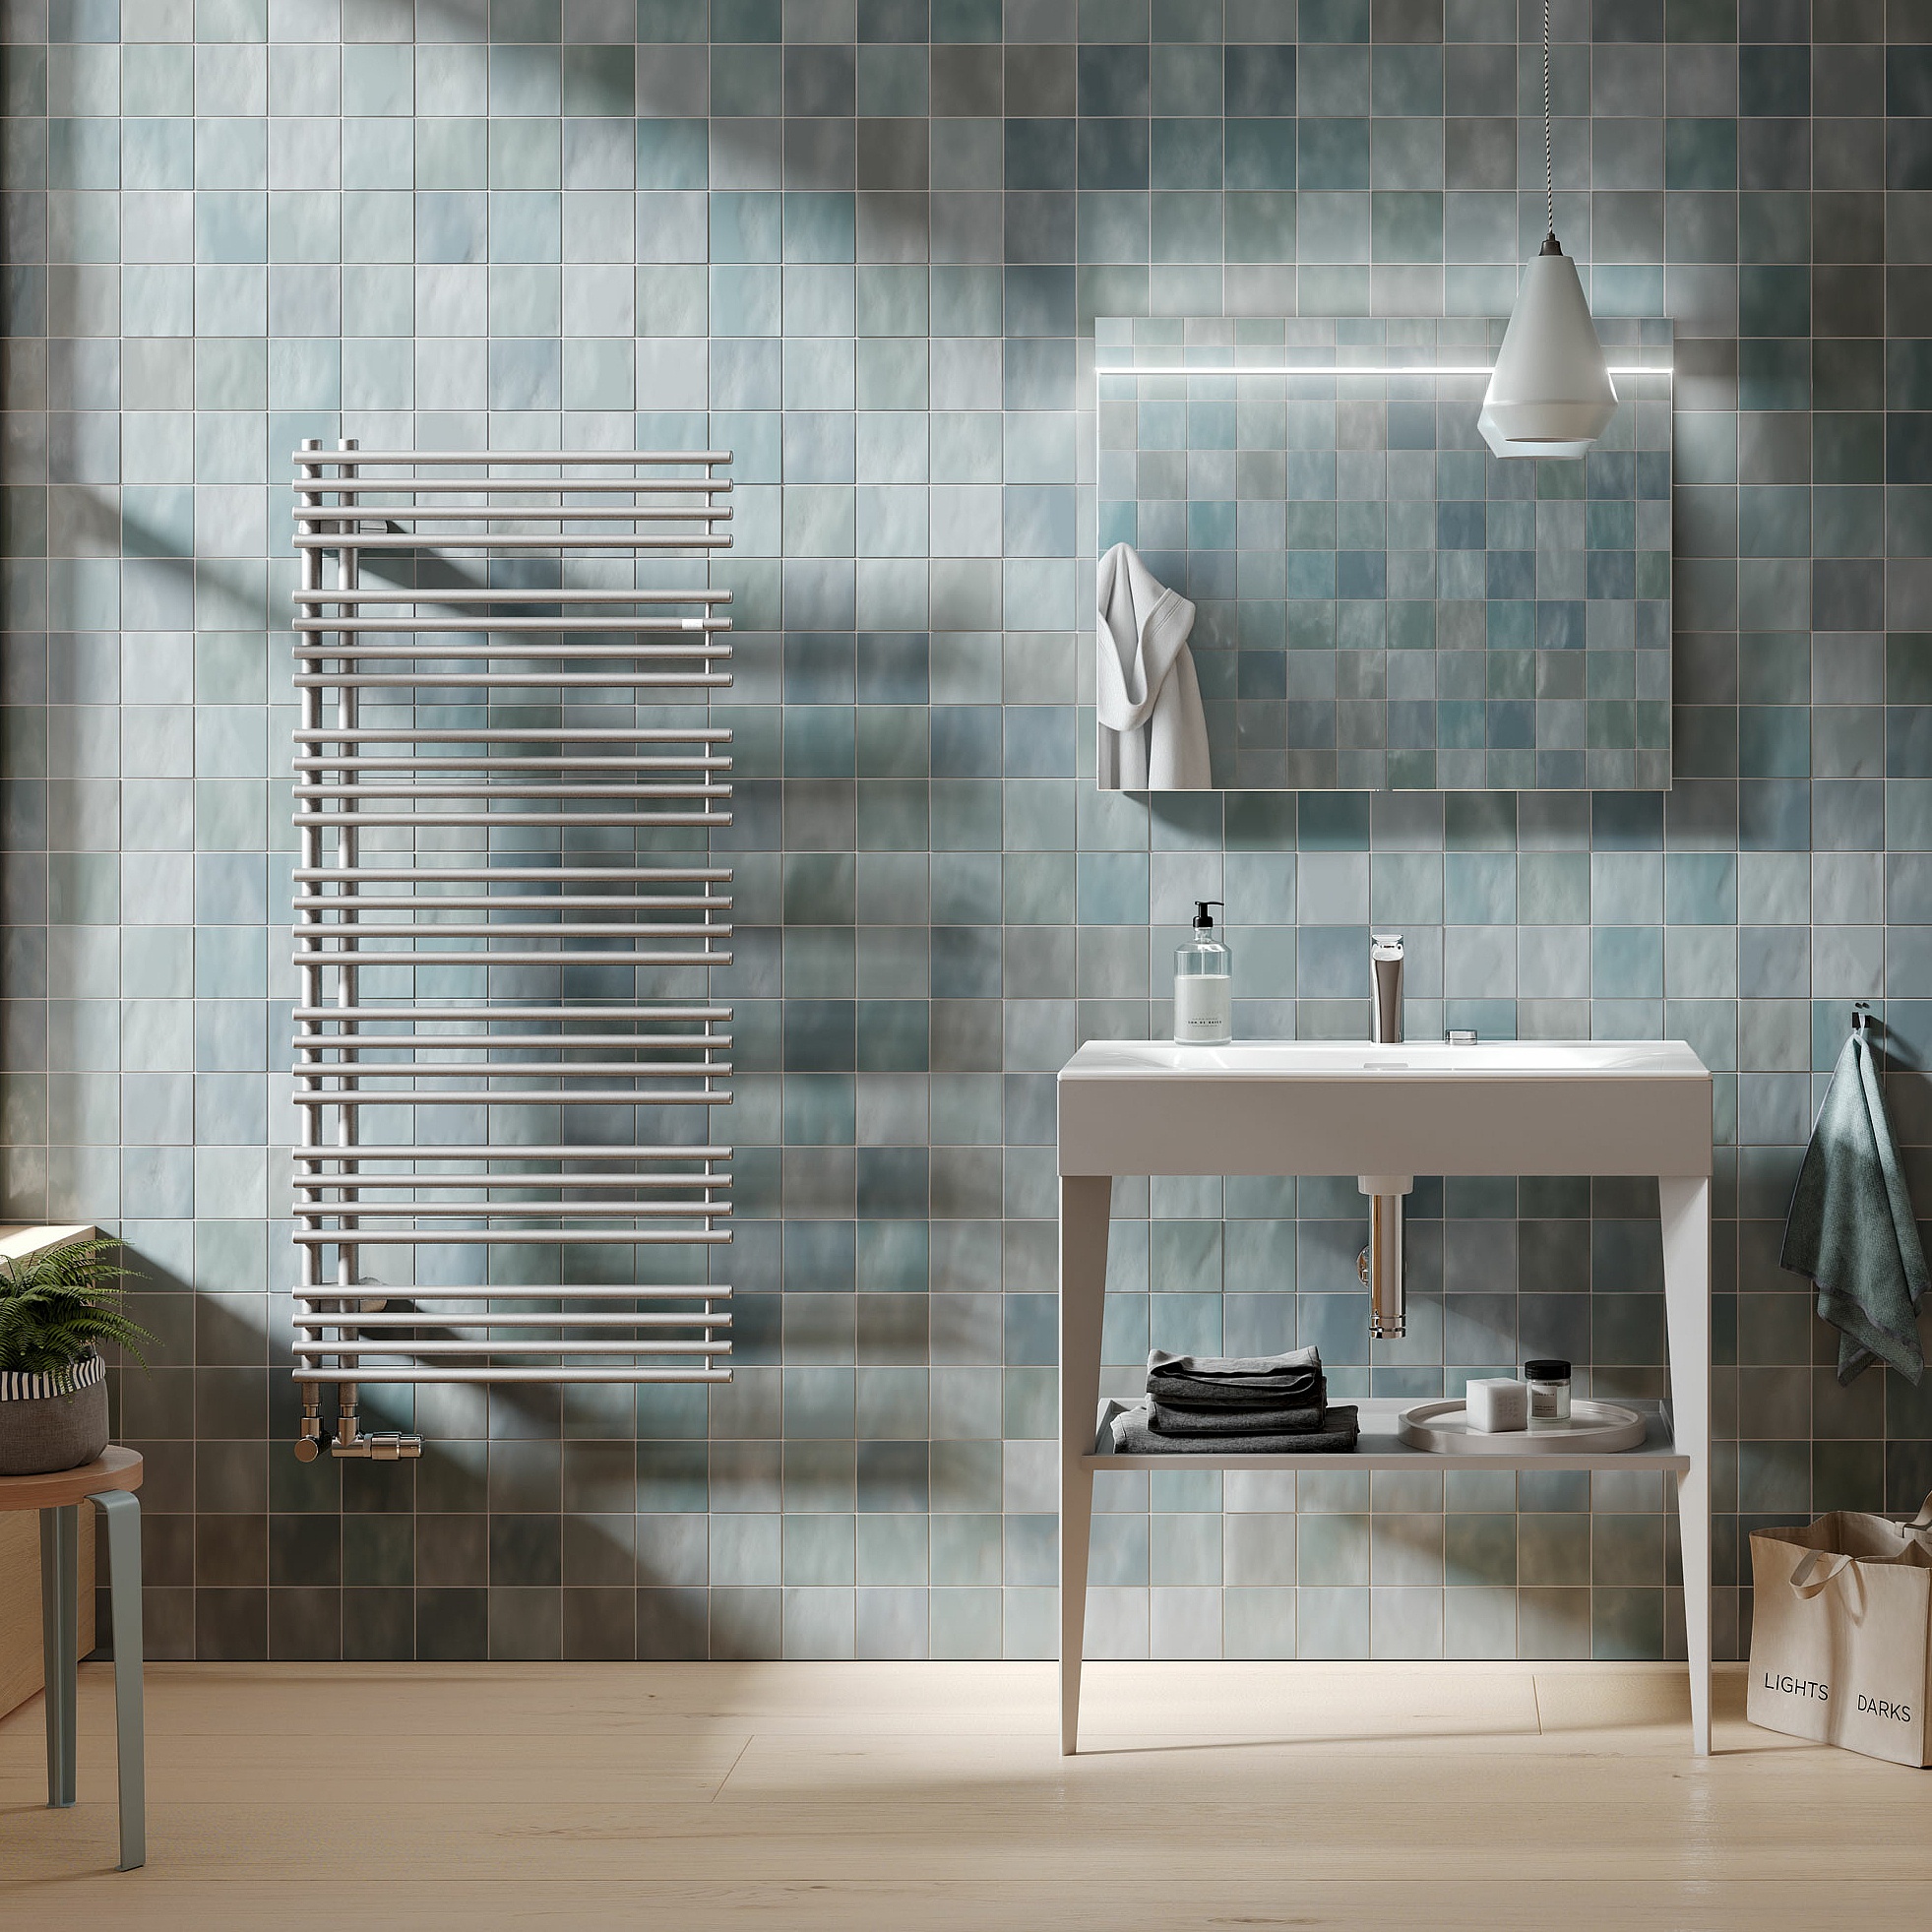 Kermi Diveo designer and bathroom radiators – functionality and comfort rolled into one.